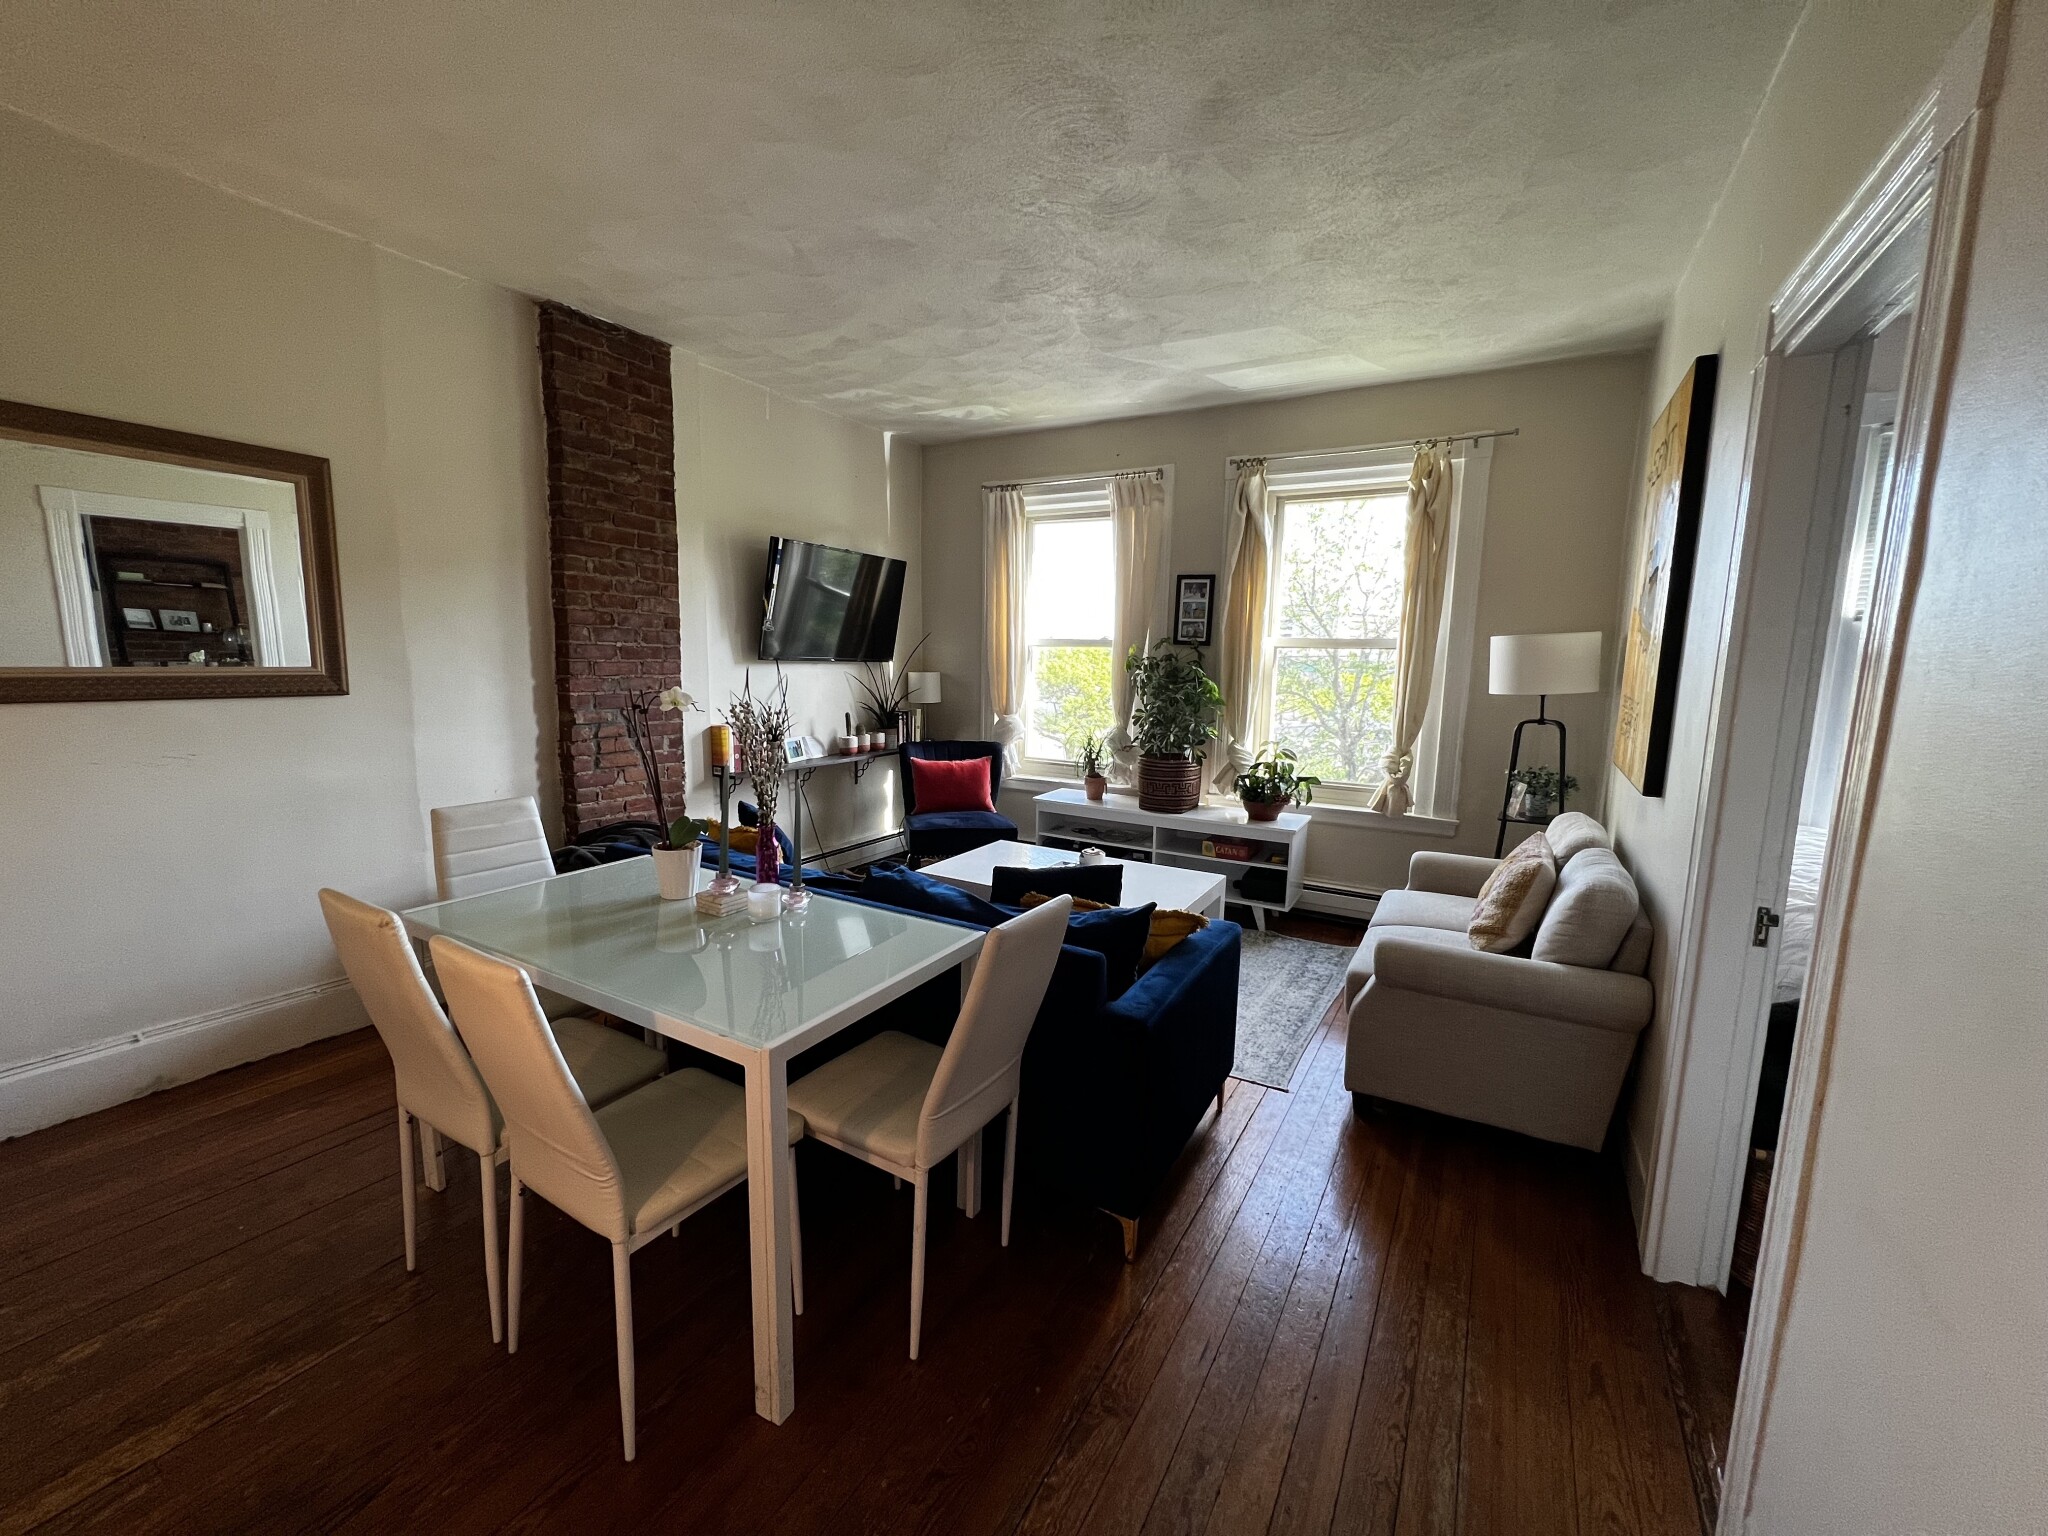 Photos of apartment on Newcomb St.,Boston MA 02118